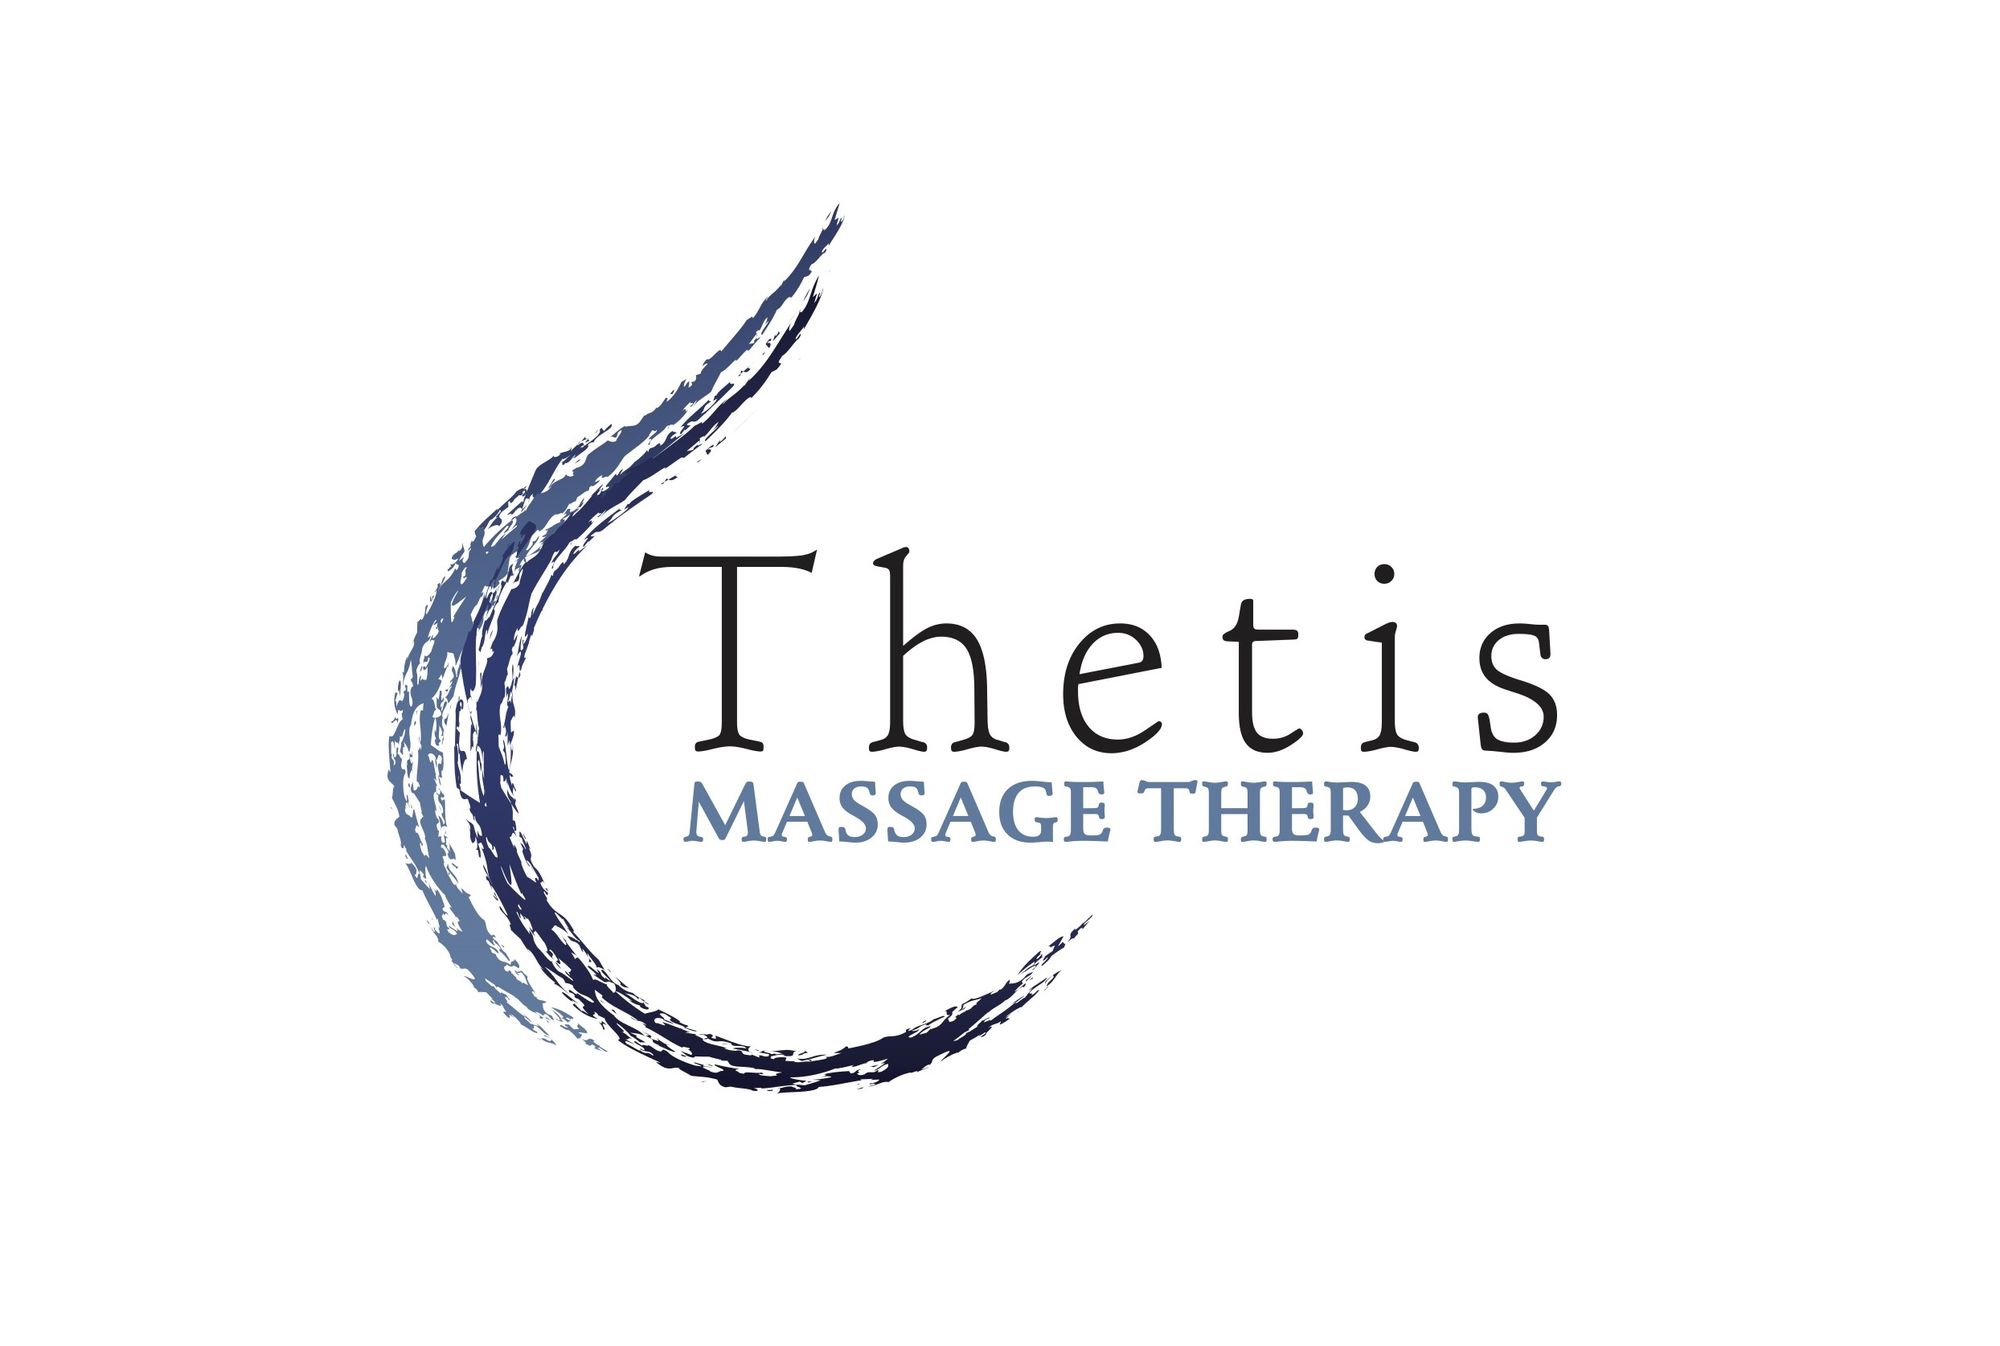 Safe and Effective Care - Thetis Massage Therapy